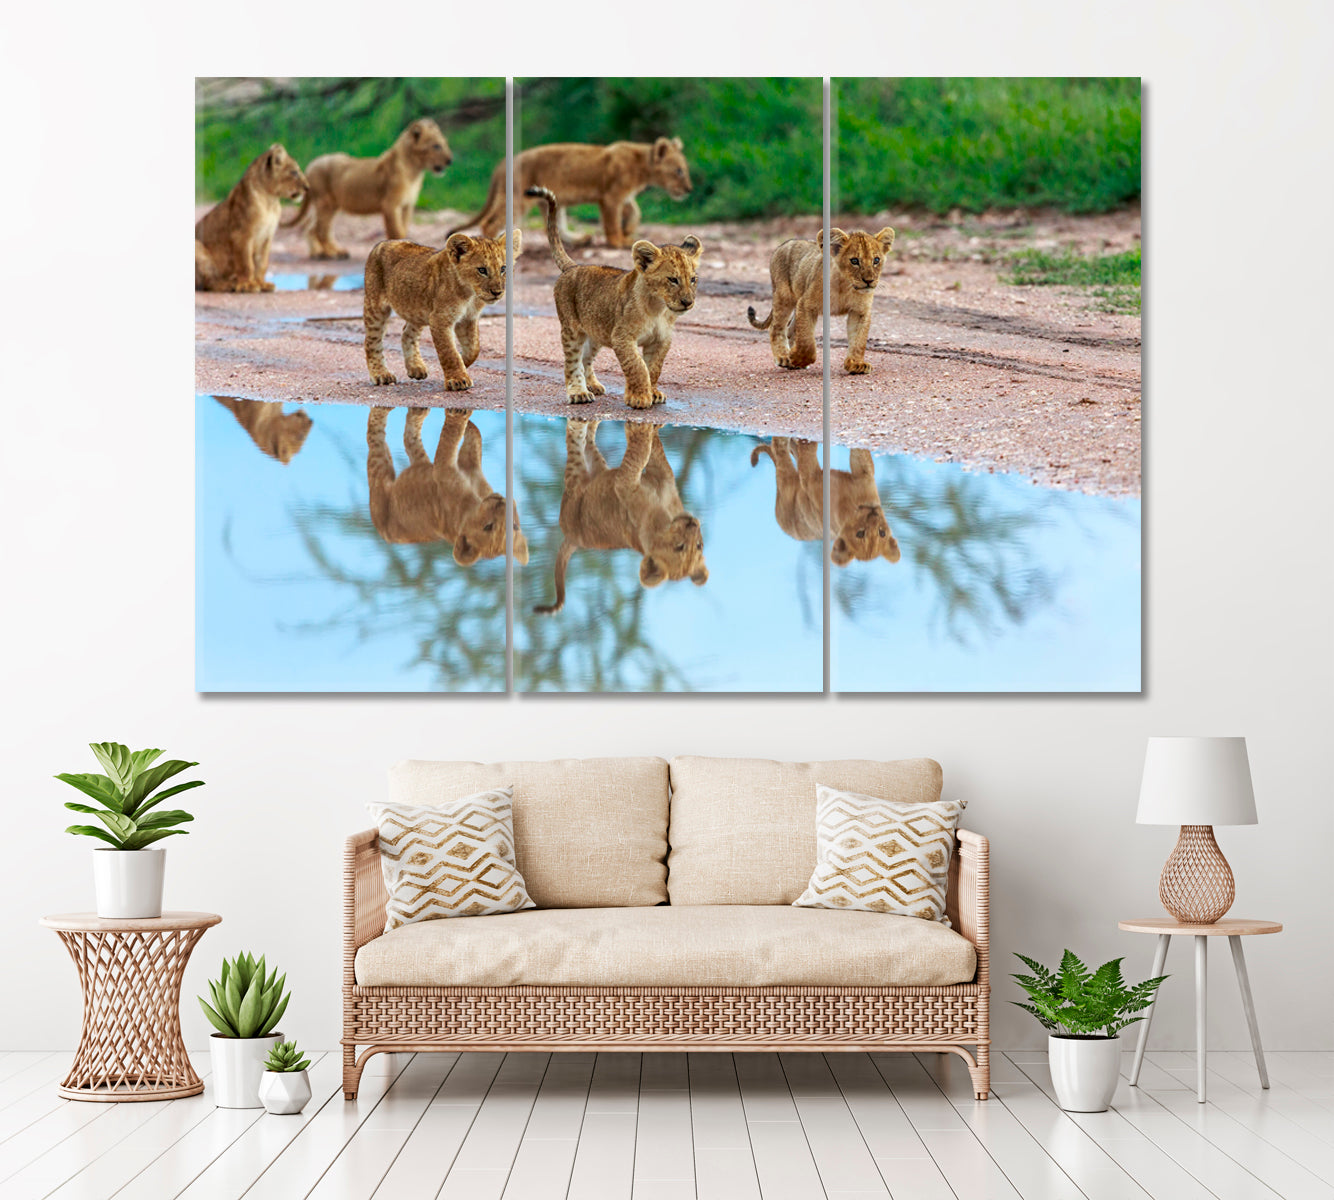 Wild Lion Cubs in Natural Habitat Canvas Print ArtLexy 3 Panels 36"x24" inches 